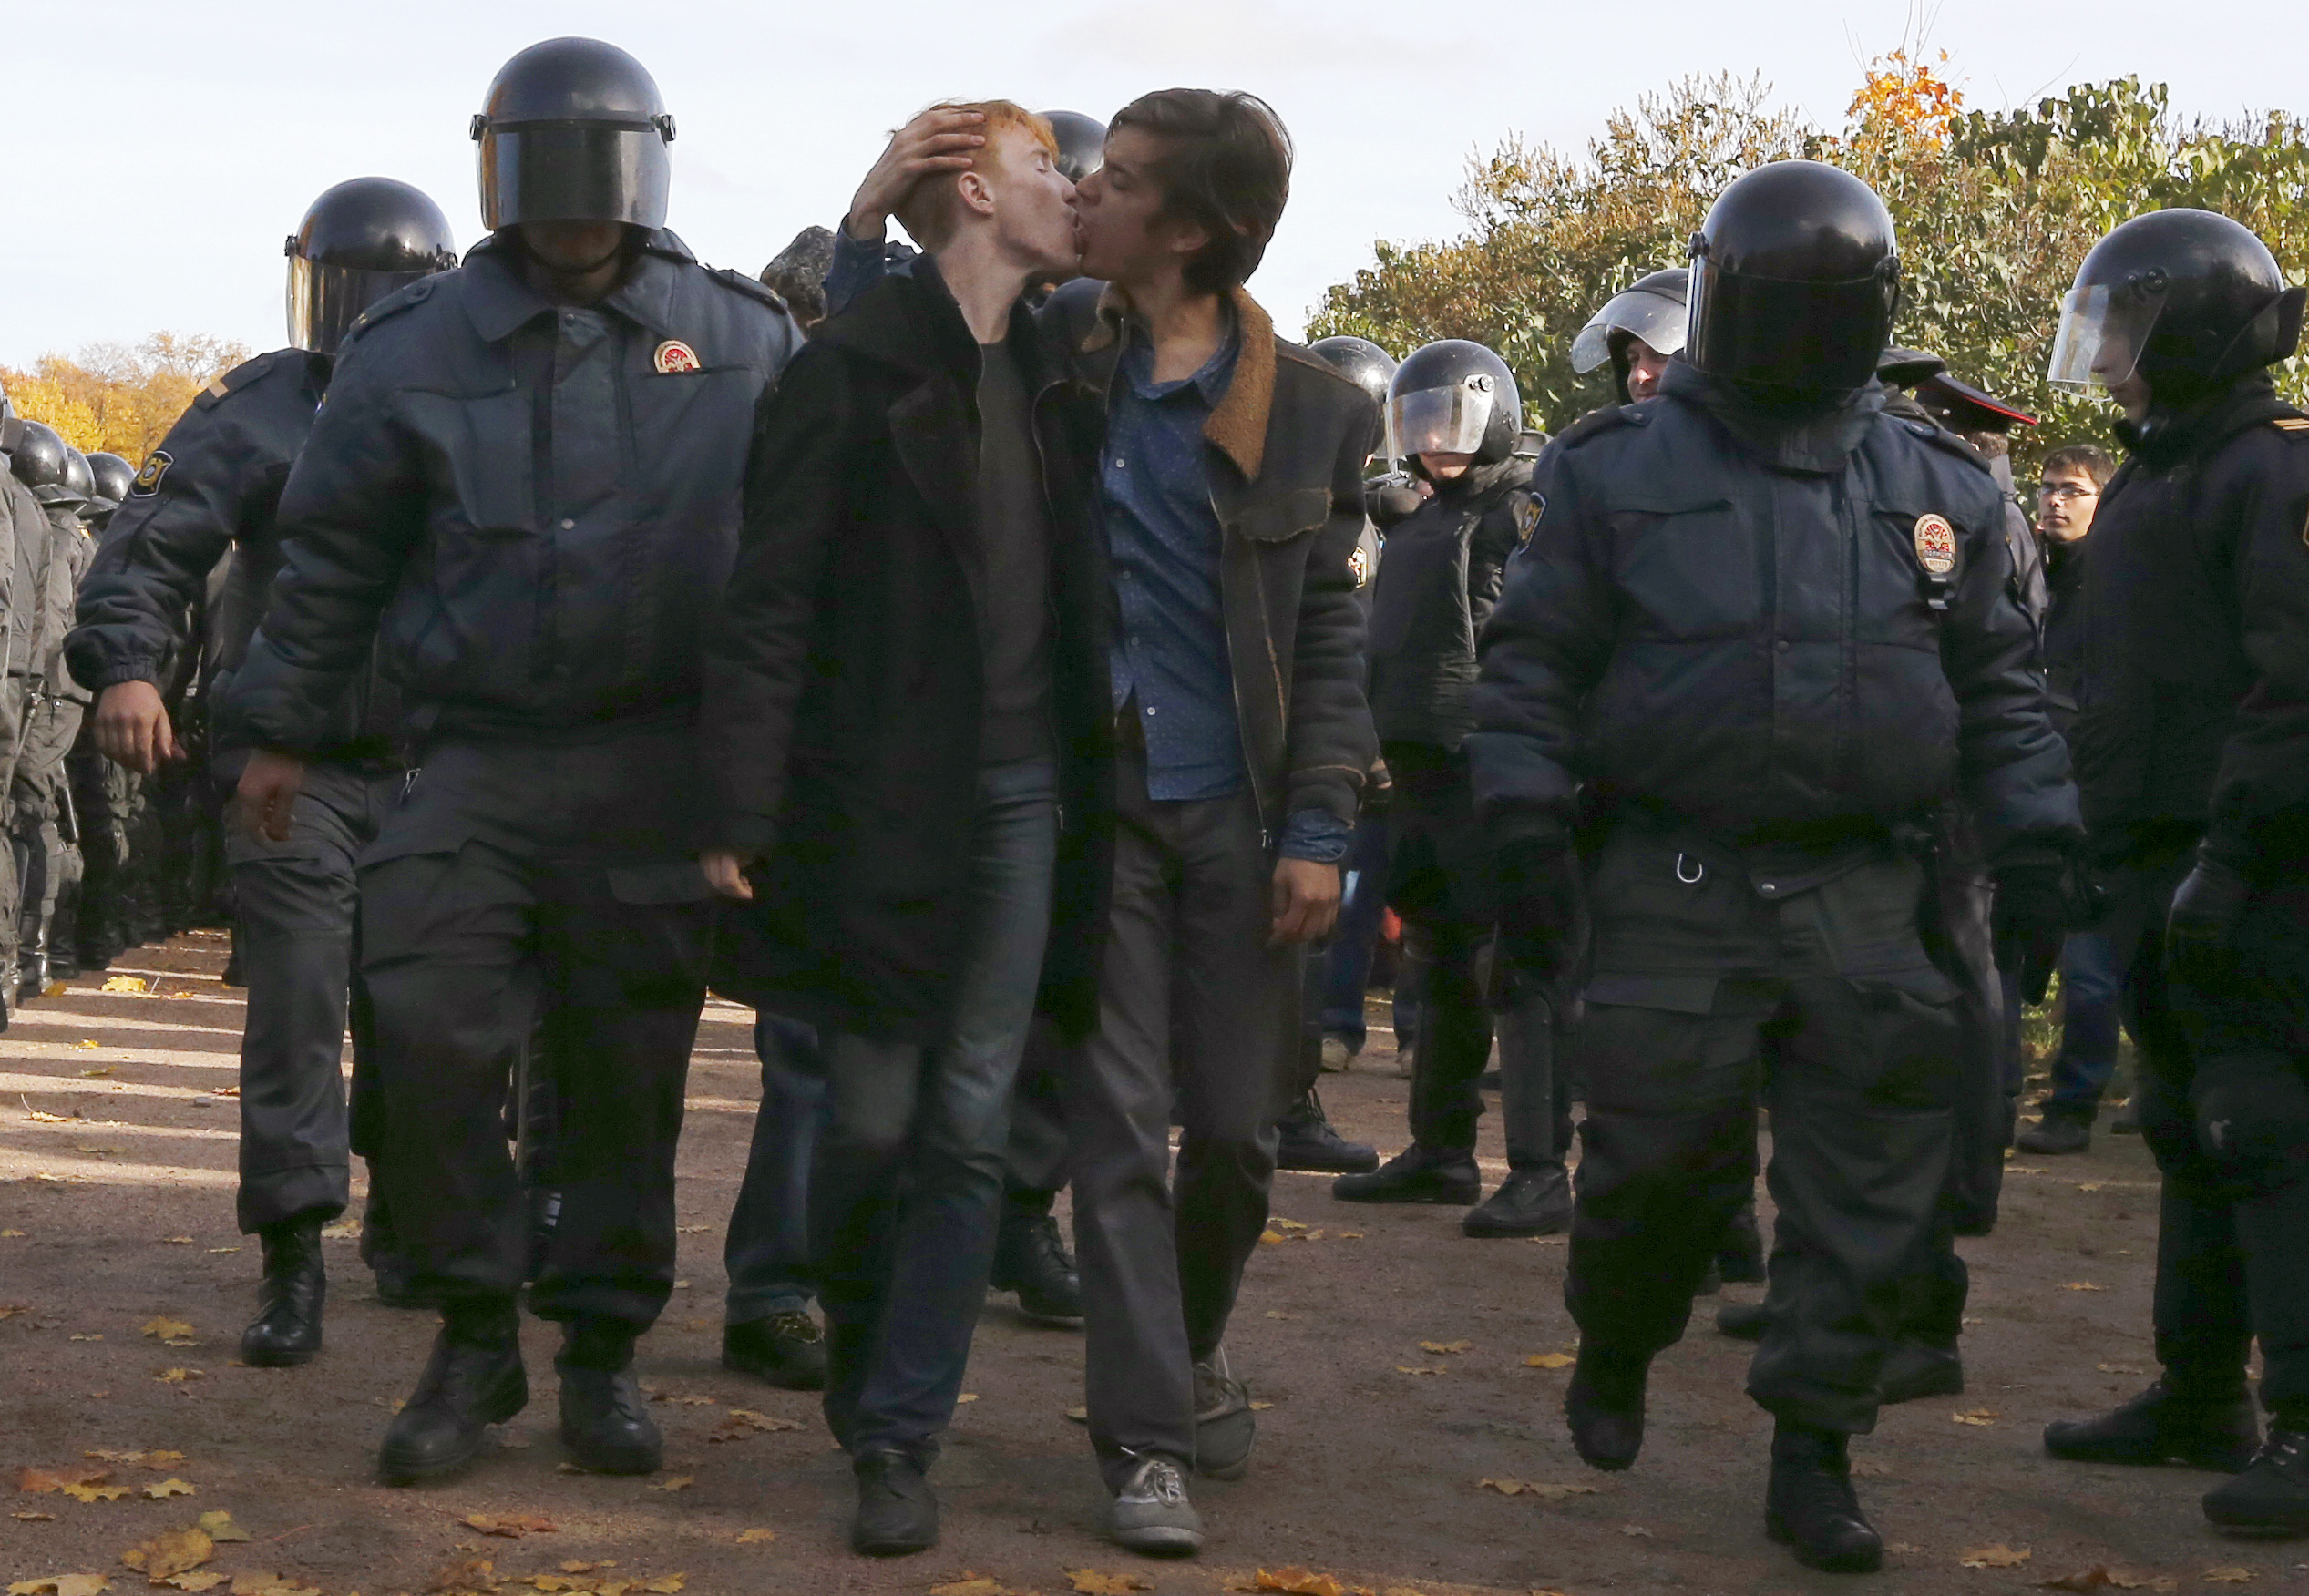 12 October 2013, Russia. LGBT rights activists kiss as they are taken away by police officers during a protest in St. Petersburg.